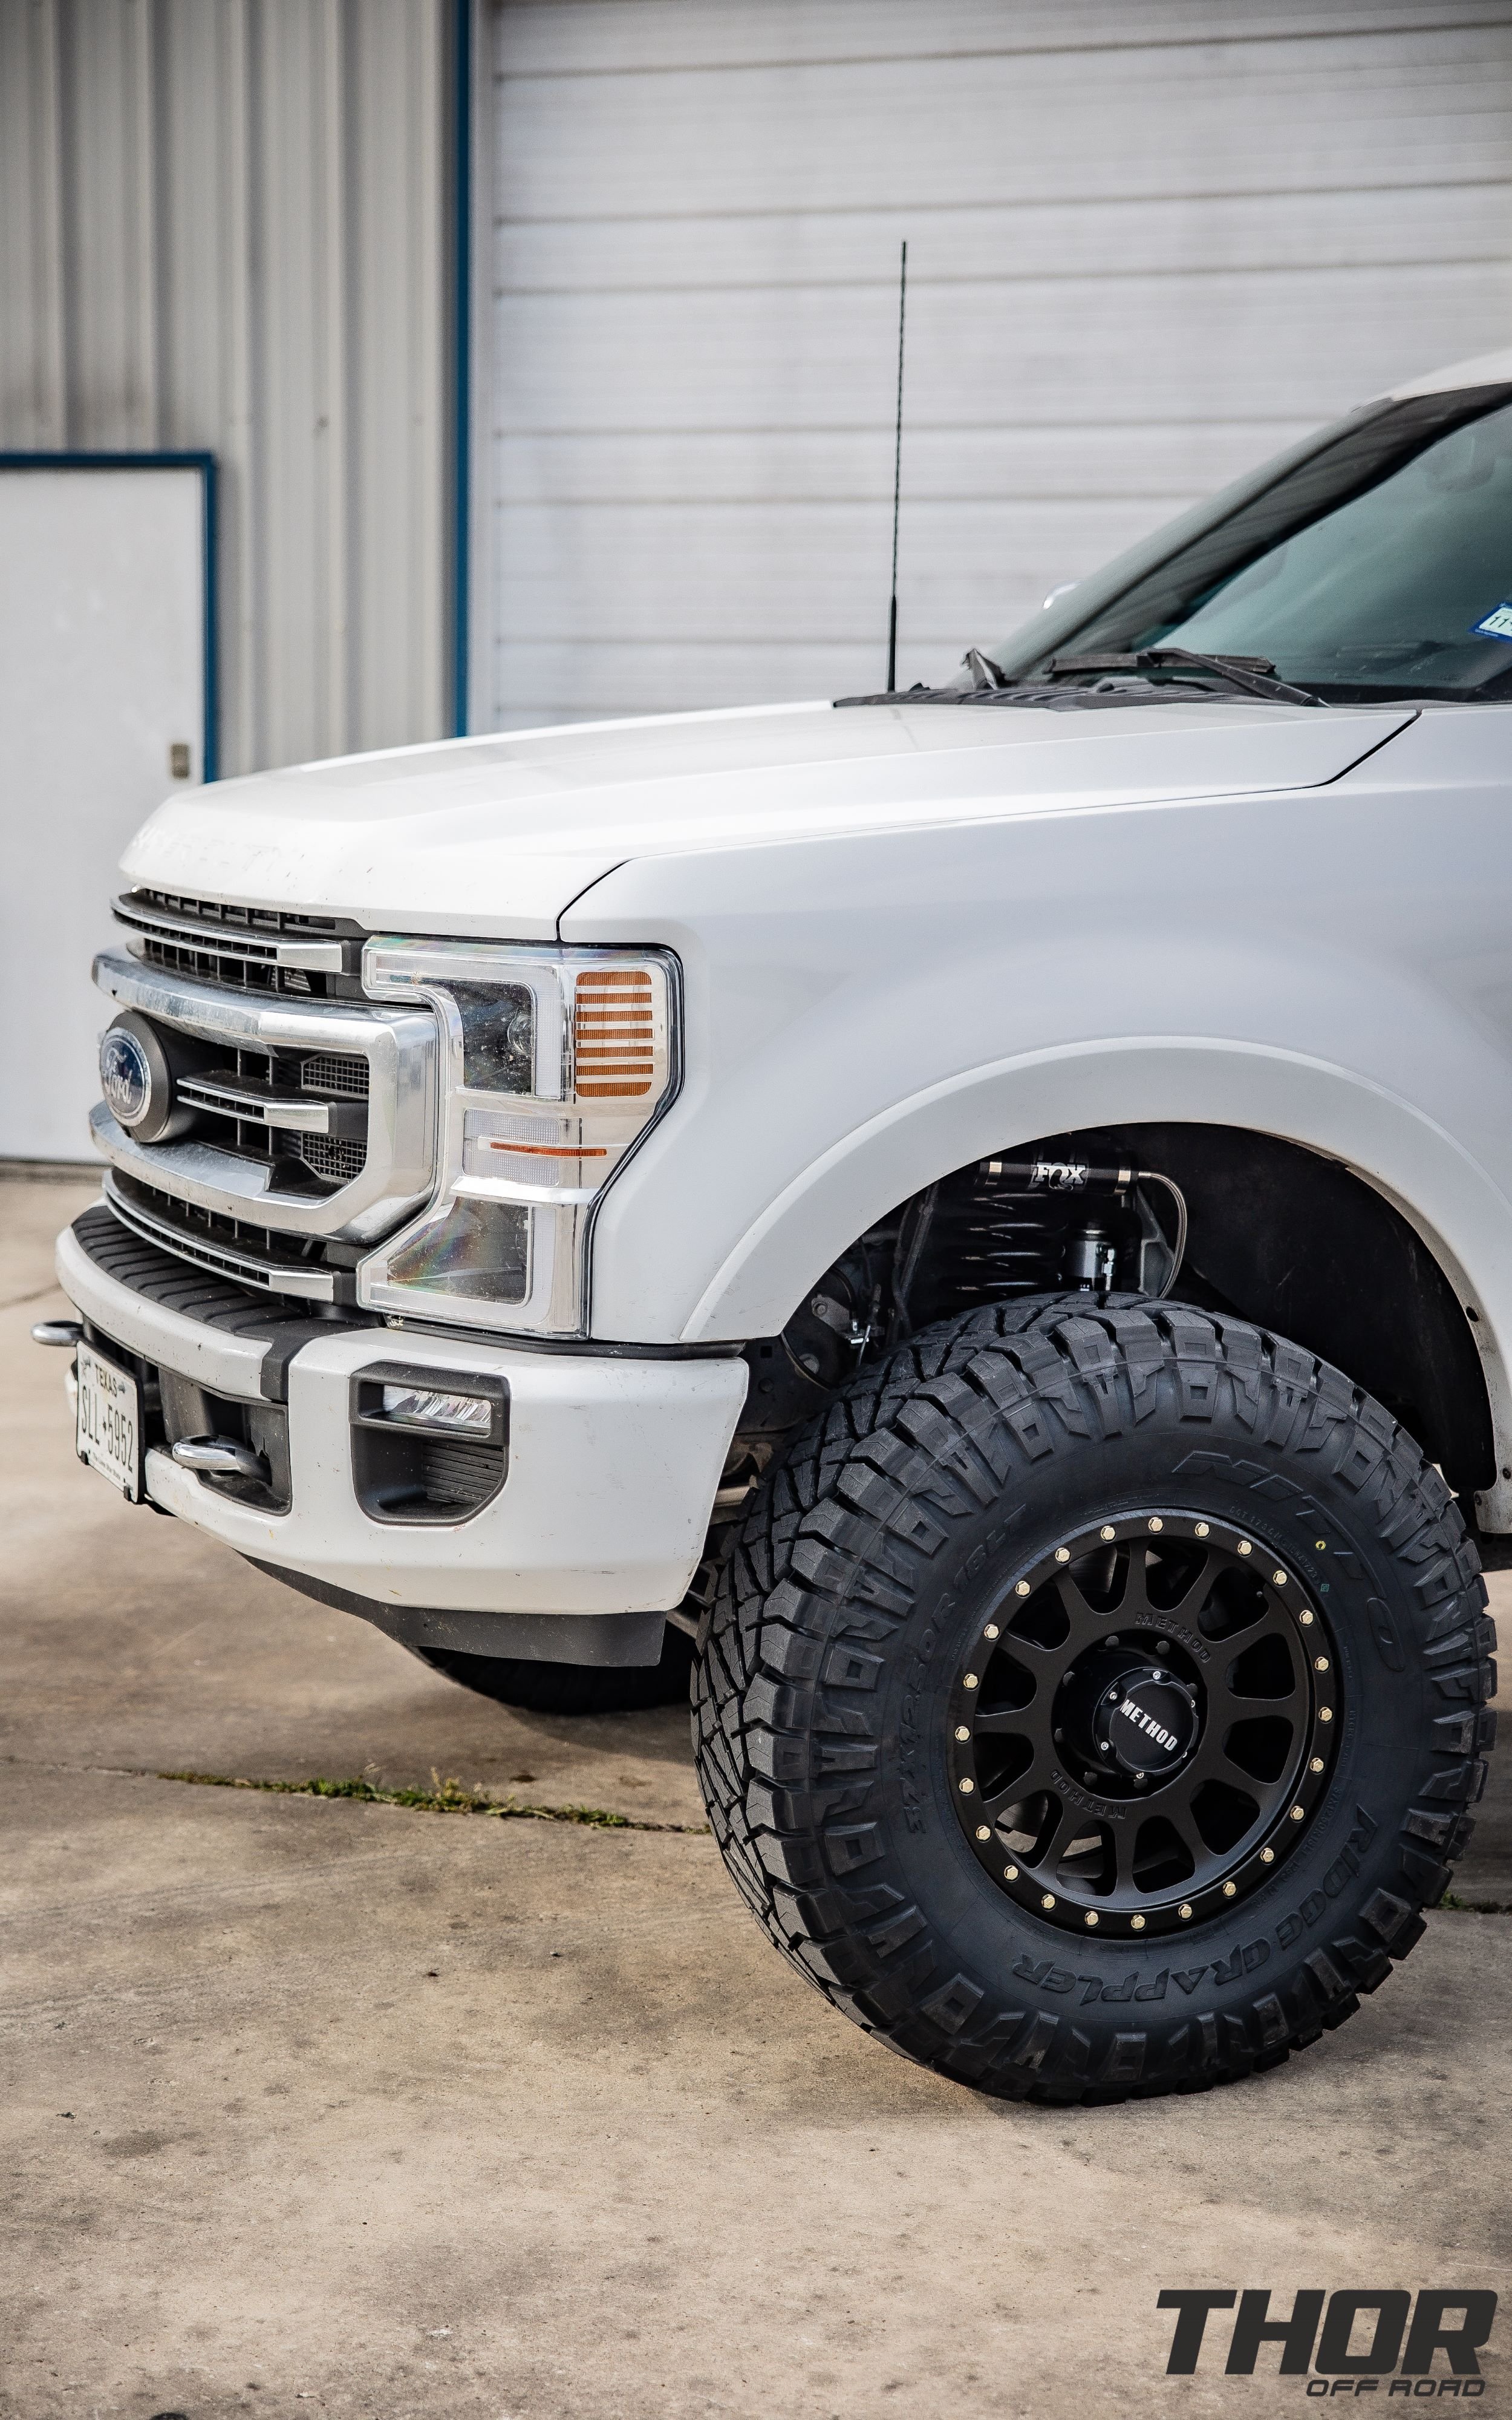 2022 Ford F-350 Super Duty Platinum in White with Carli Backcountry 3.5" Suspension Kit, Carli High Mount Steering Stabilizer, Carli Torsion Sway Bar, Method MR704 17x9" Bead Grip Wheels, 37x12.50R17 Toyo Open Country A/T III Tires